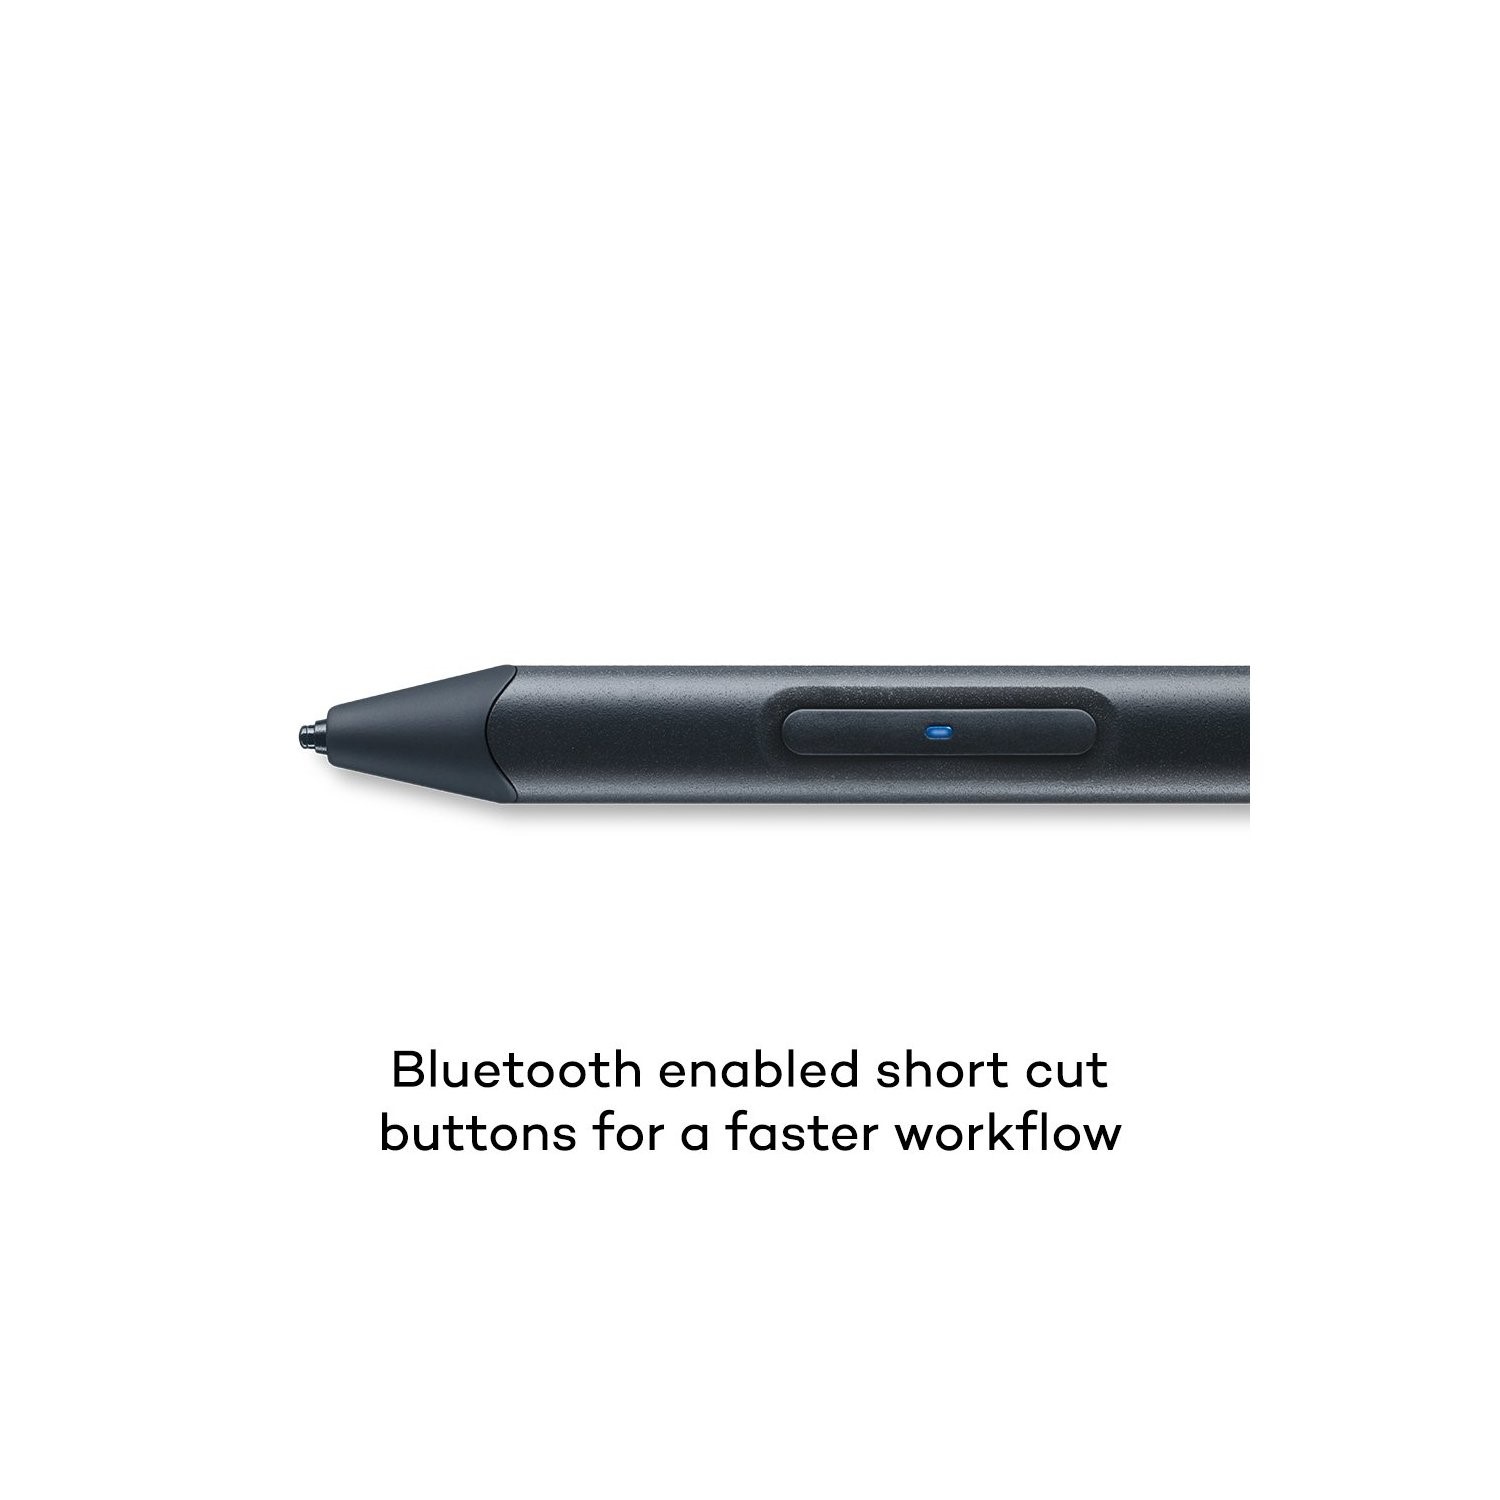 Wacom Bamboo Sketch fine tip stylus by Natural sketching on iPad and  iPhone  CS610PK Buy Best Price Global Shipping